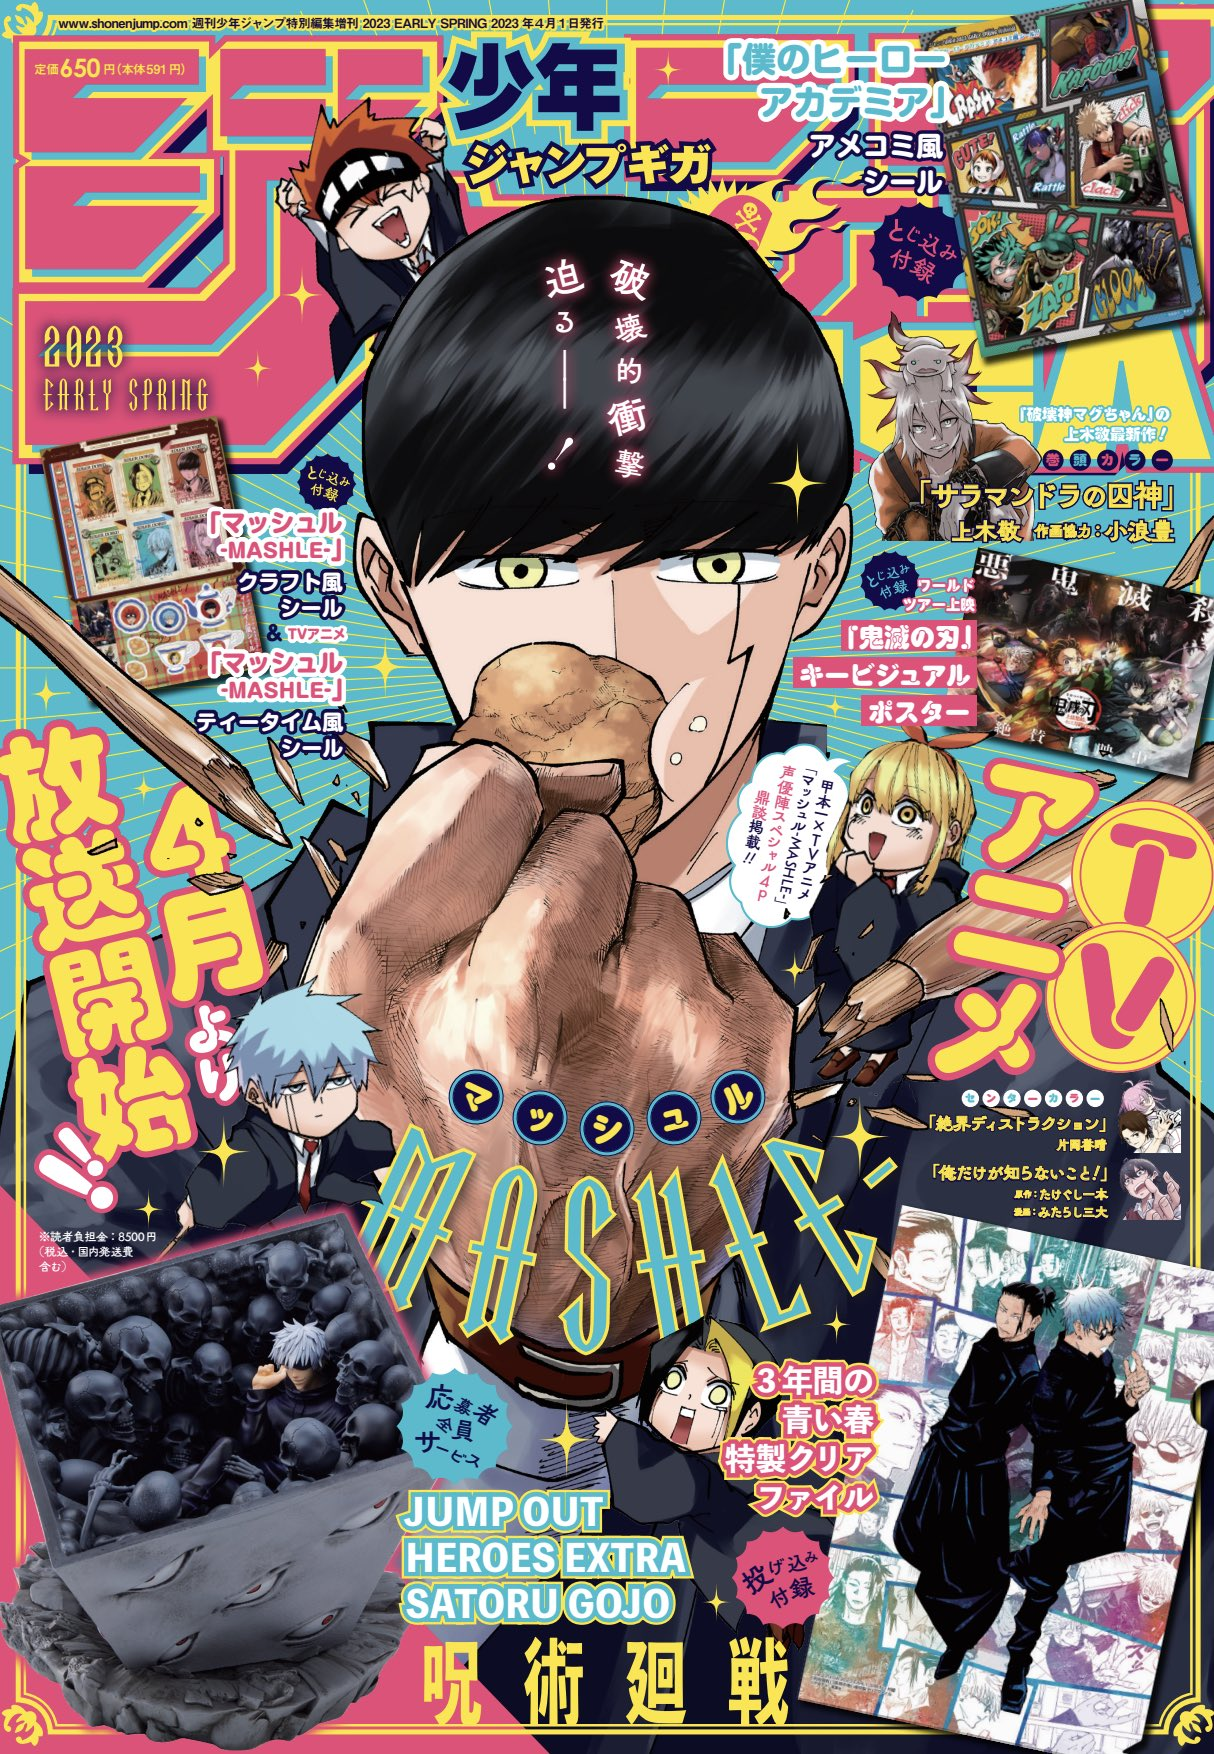 Cover of upcoming Jump SQ Rise issue Spring 2023 April 27, with